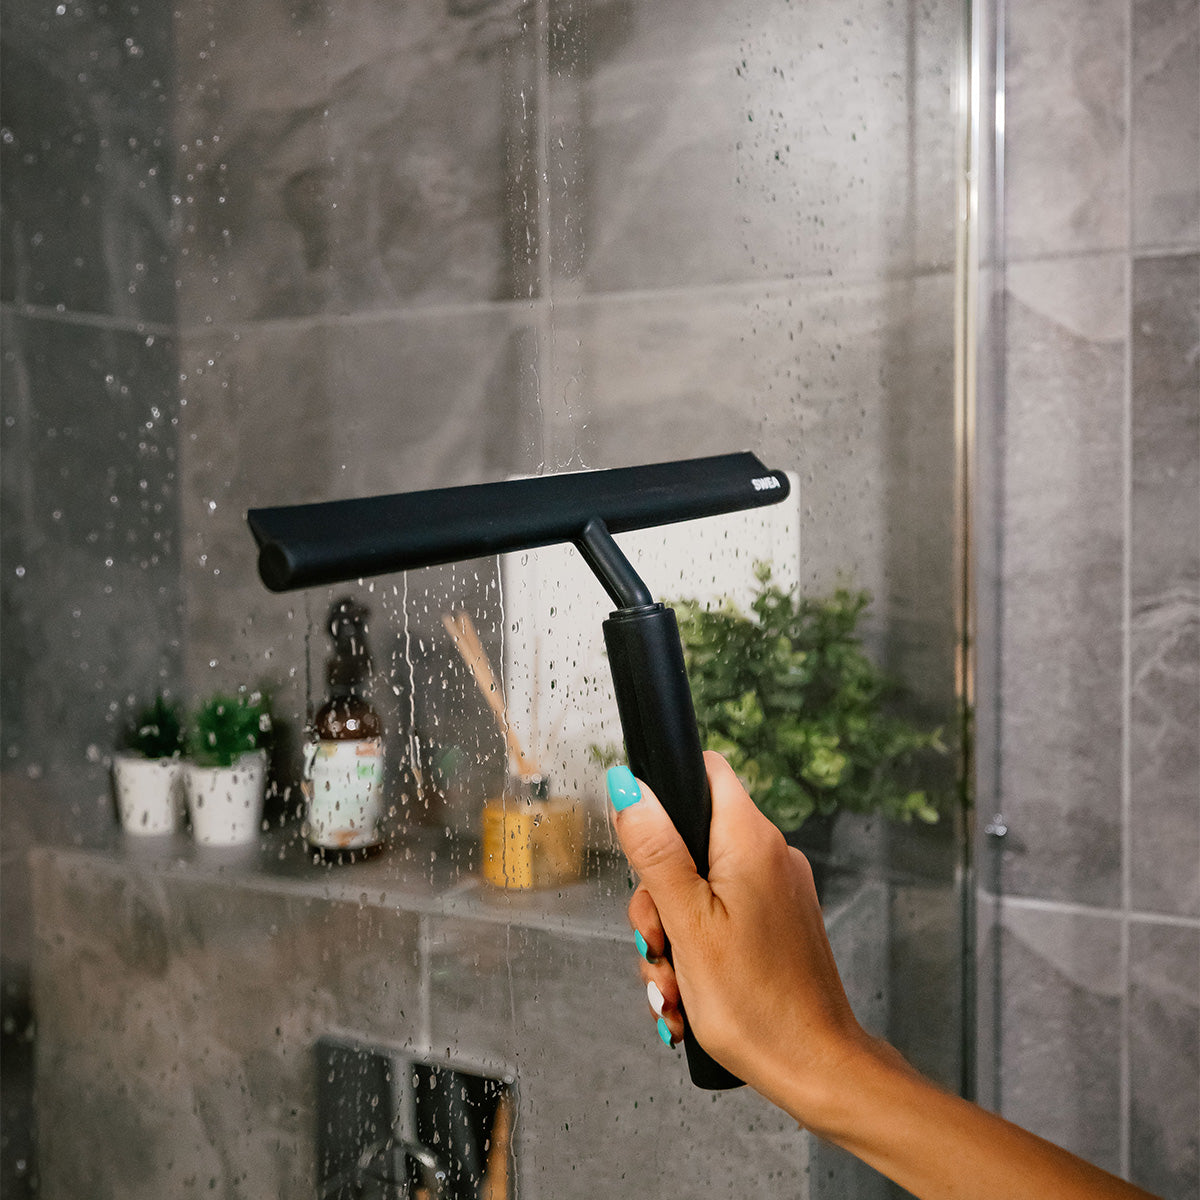 The SWEA black shower squeegee being demonstrated in a bathroom